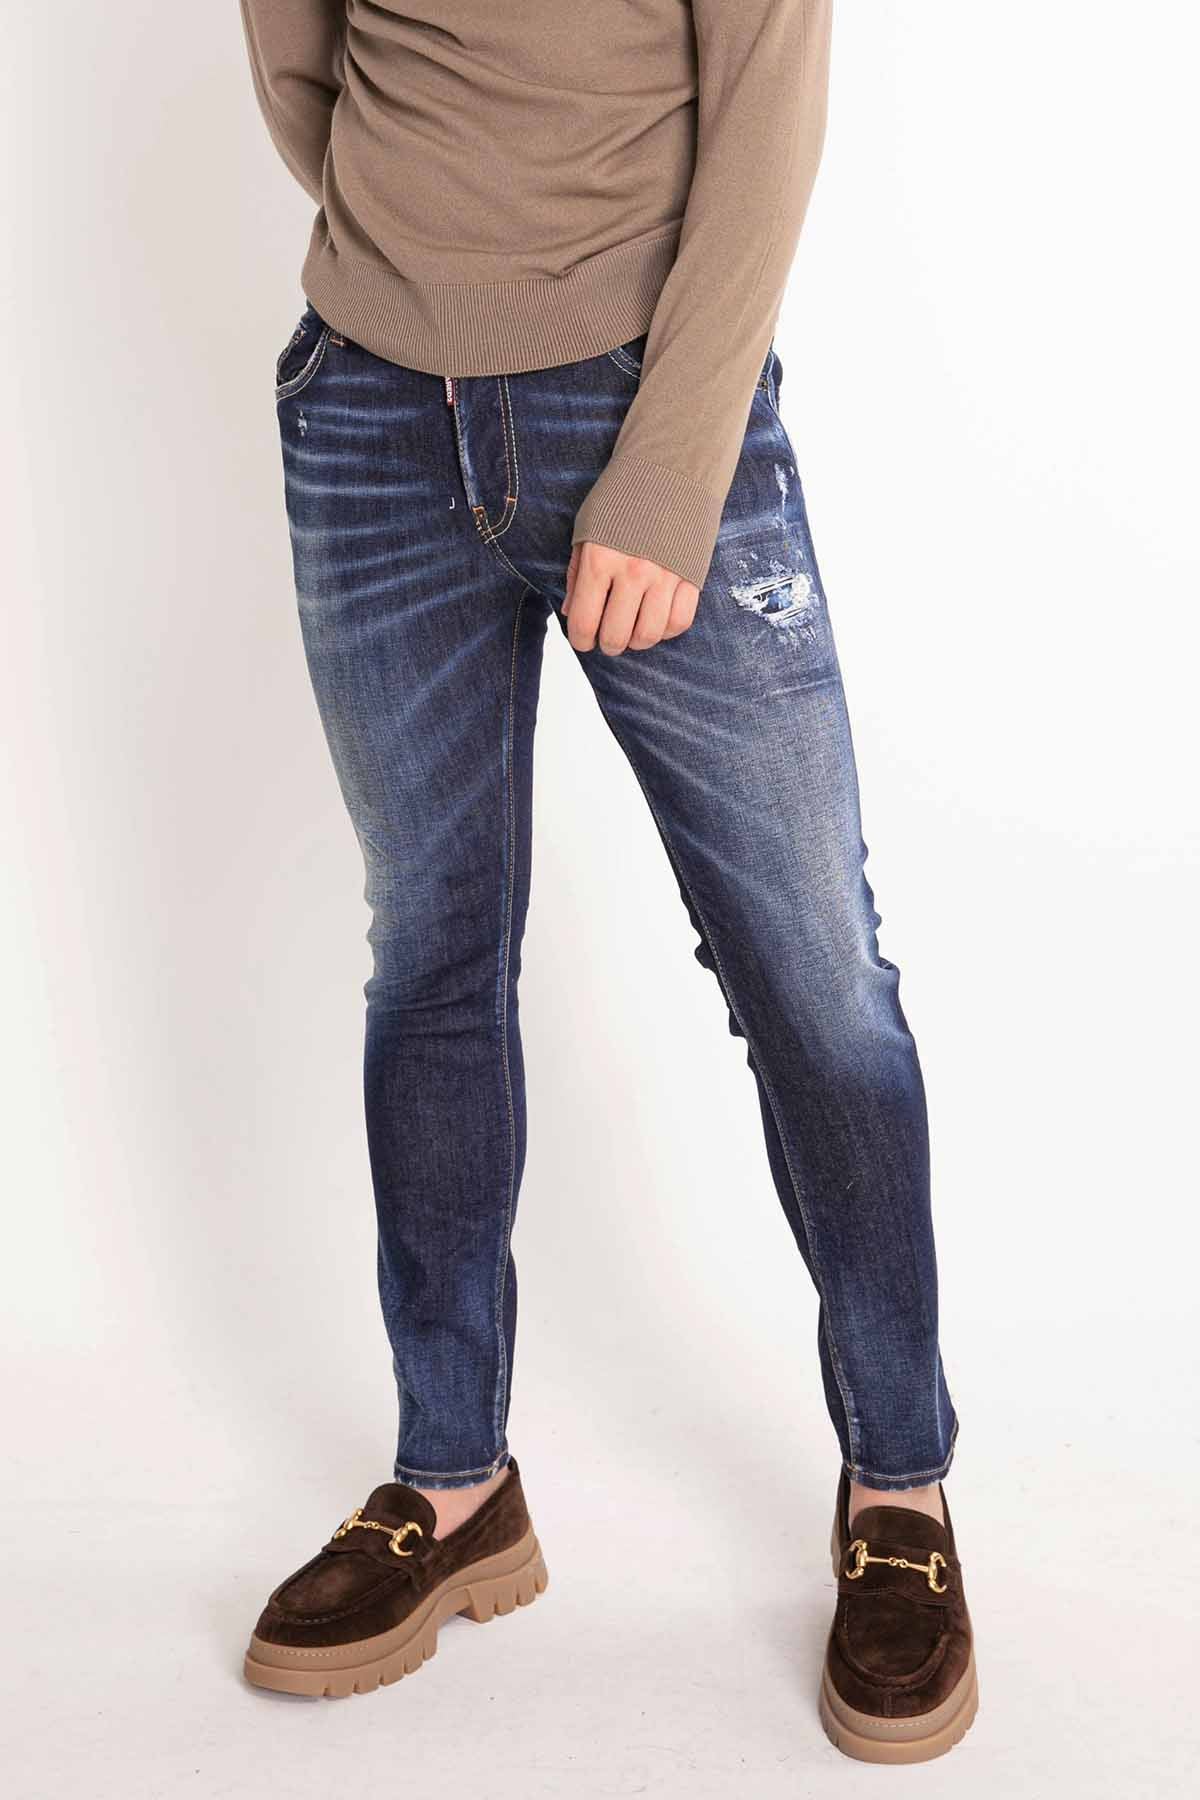 Dsquared Skater Jeans-Libas Trendy Fashion Store